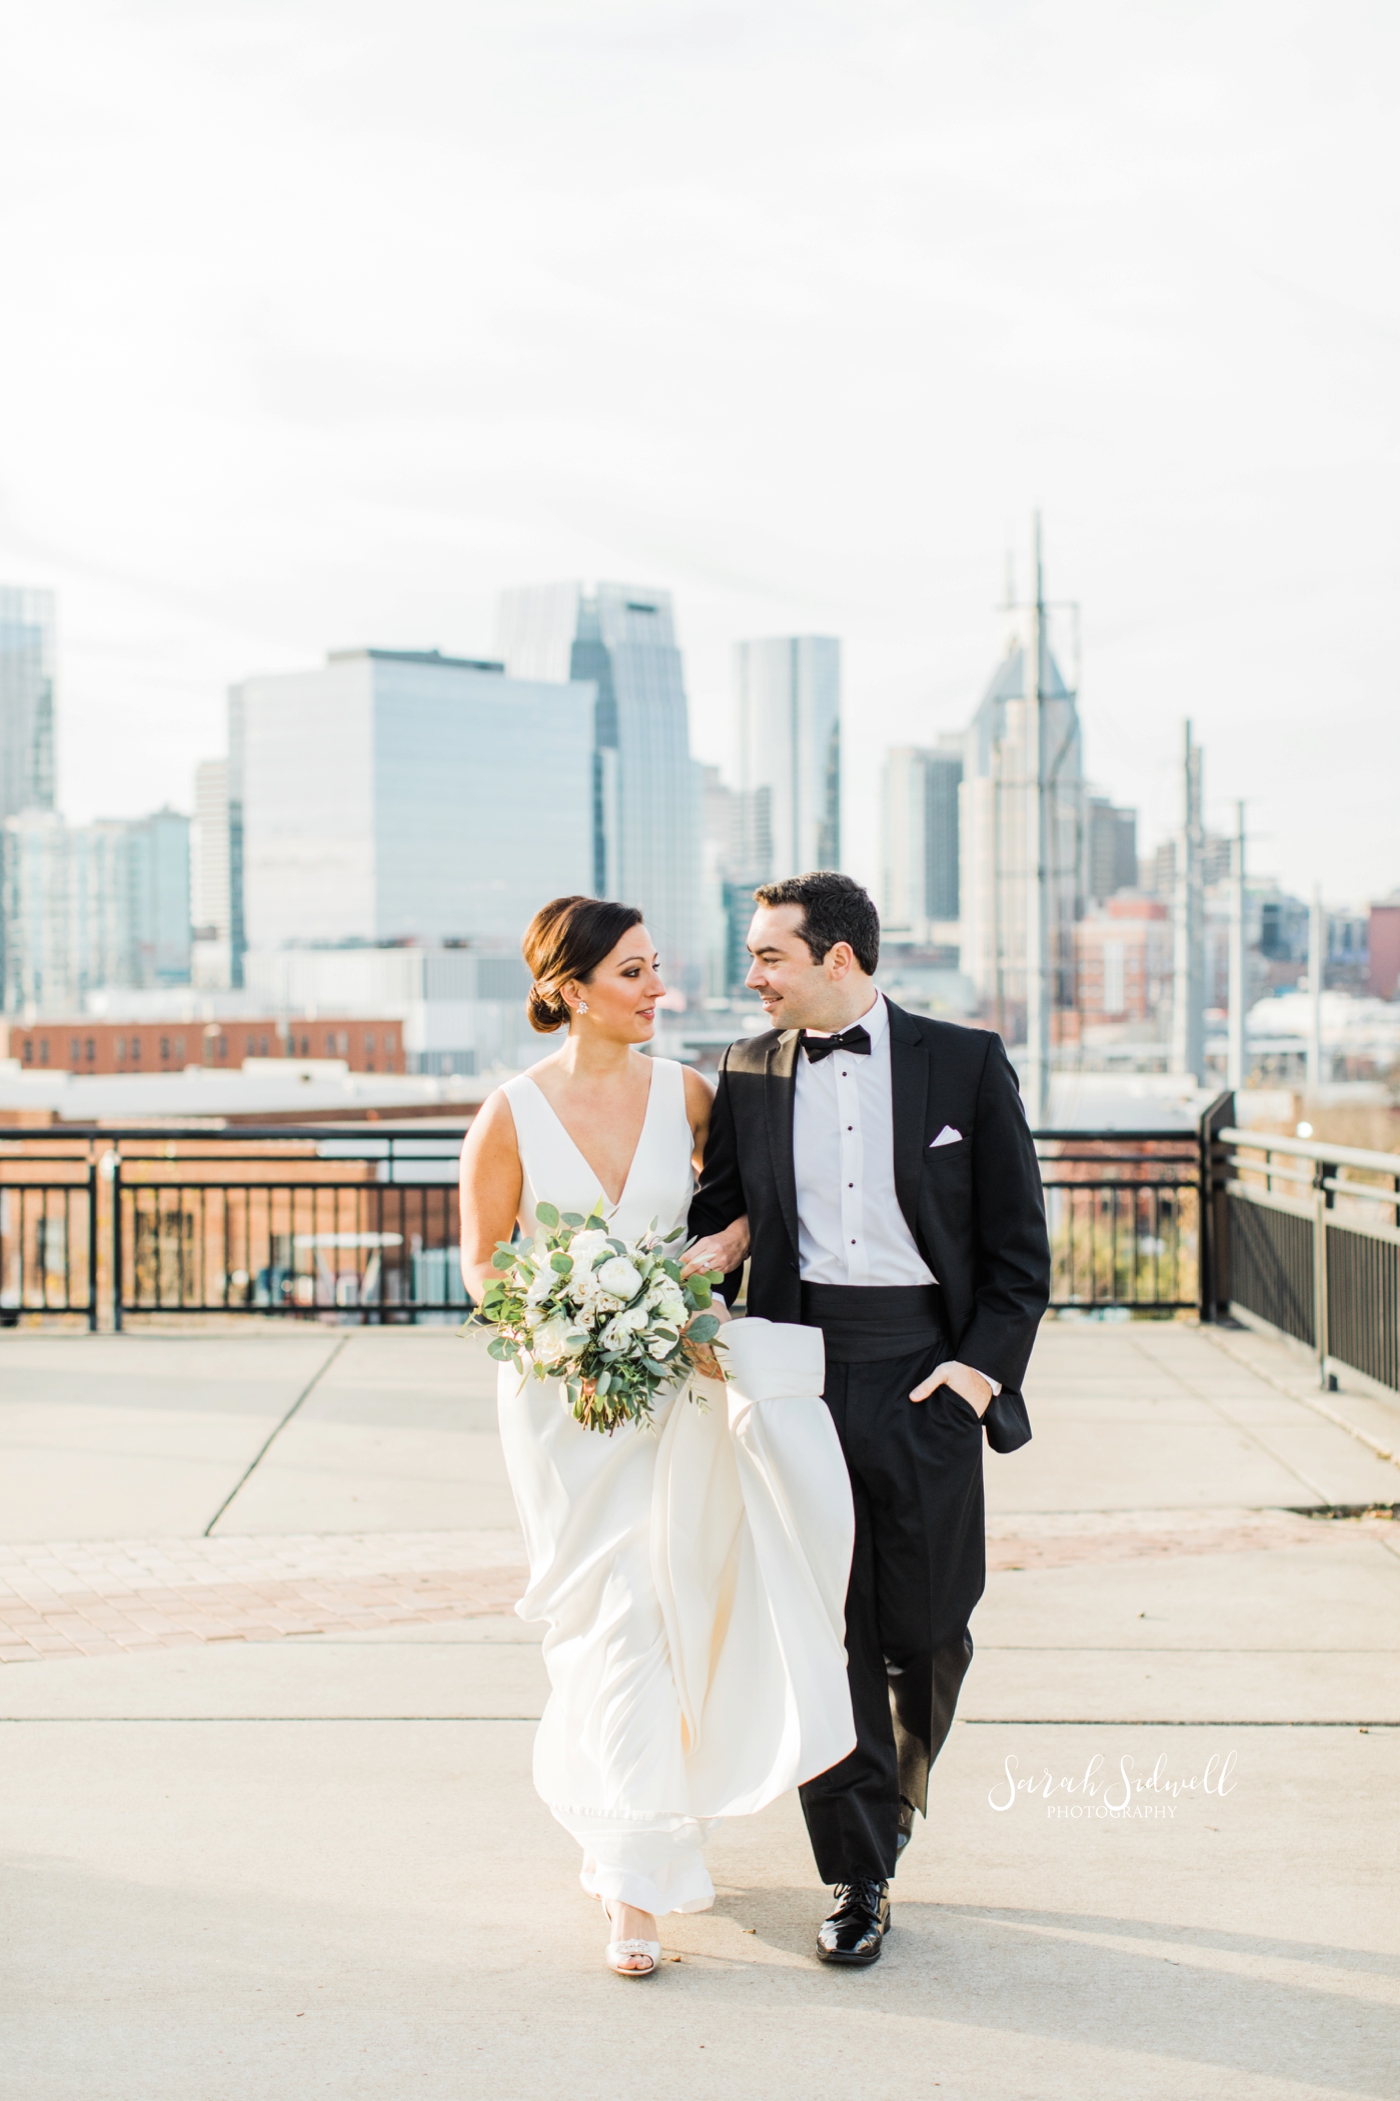 A bride and groom walk together | Sarah Sidwell Photography | The Bell Tower